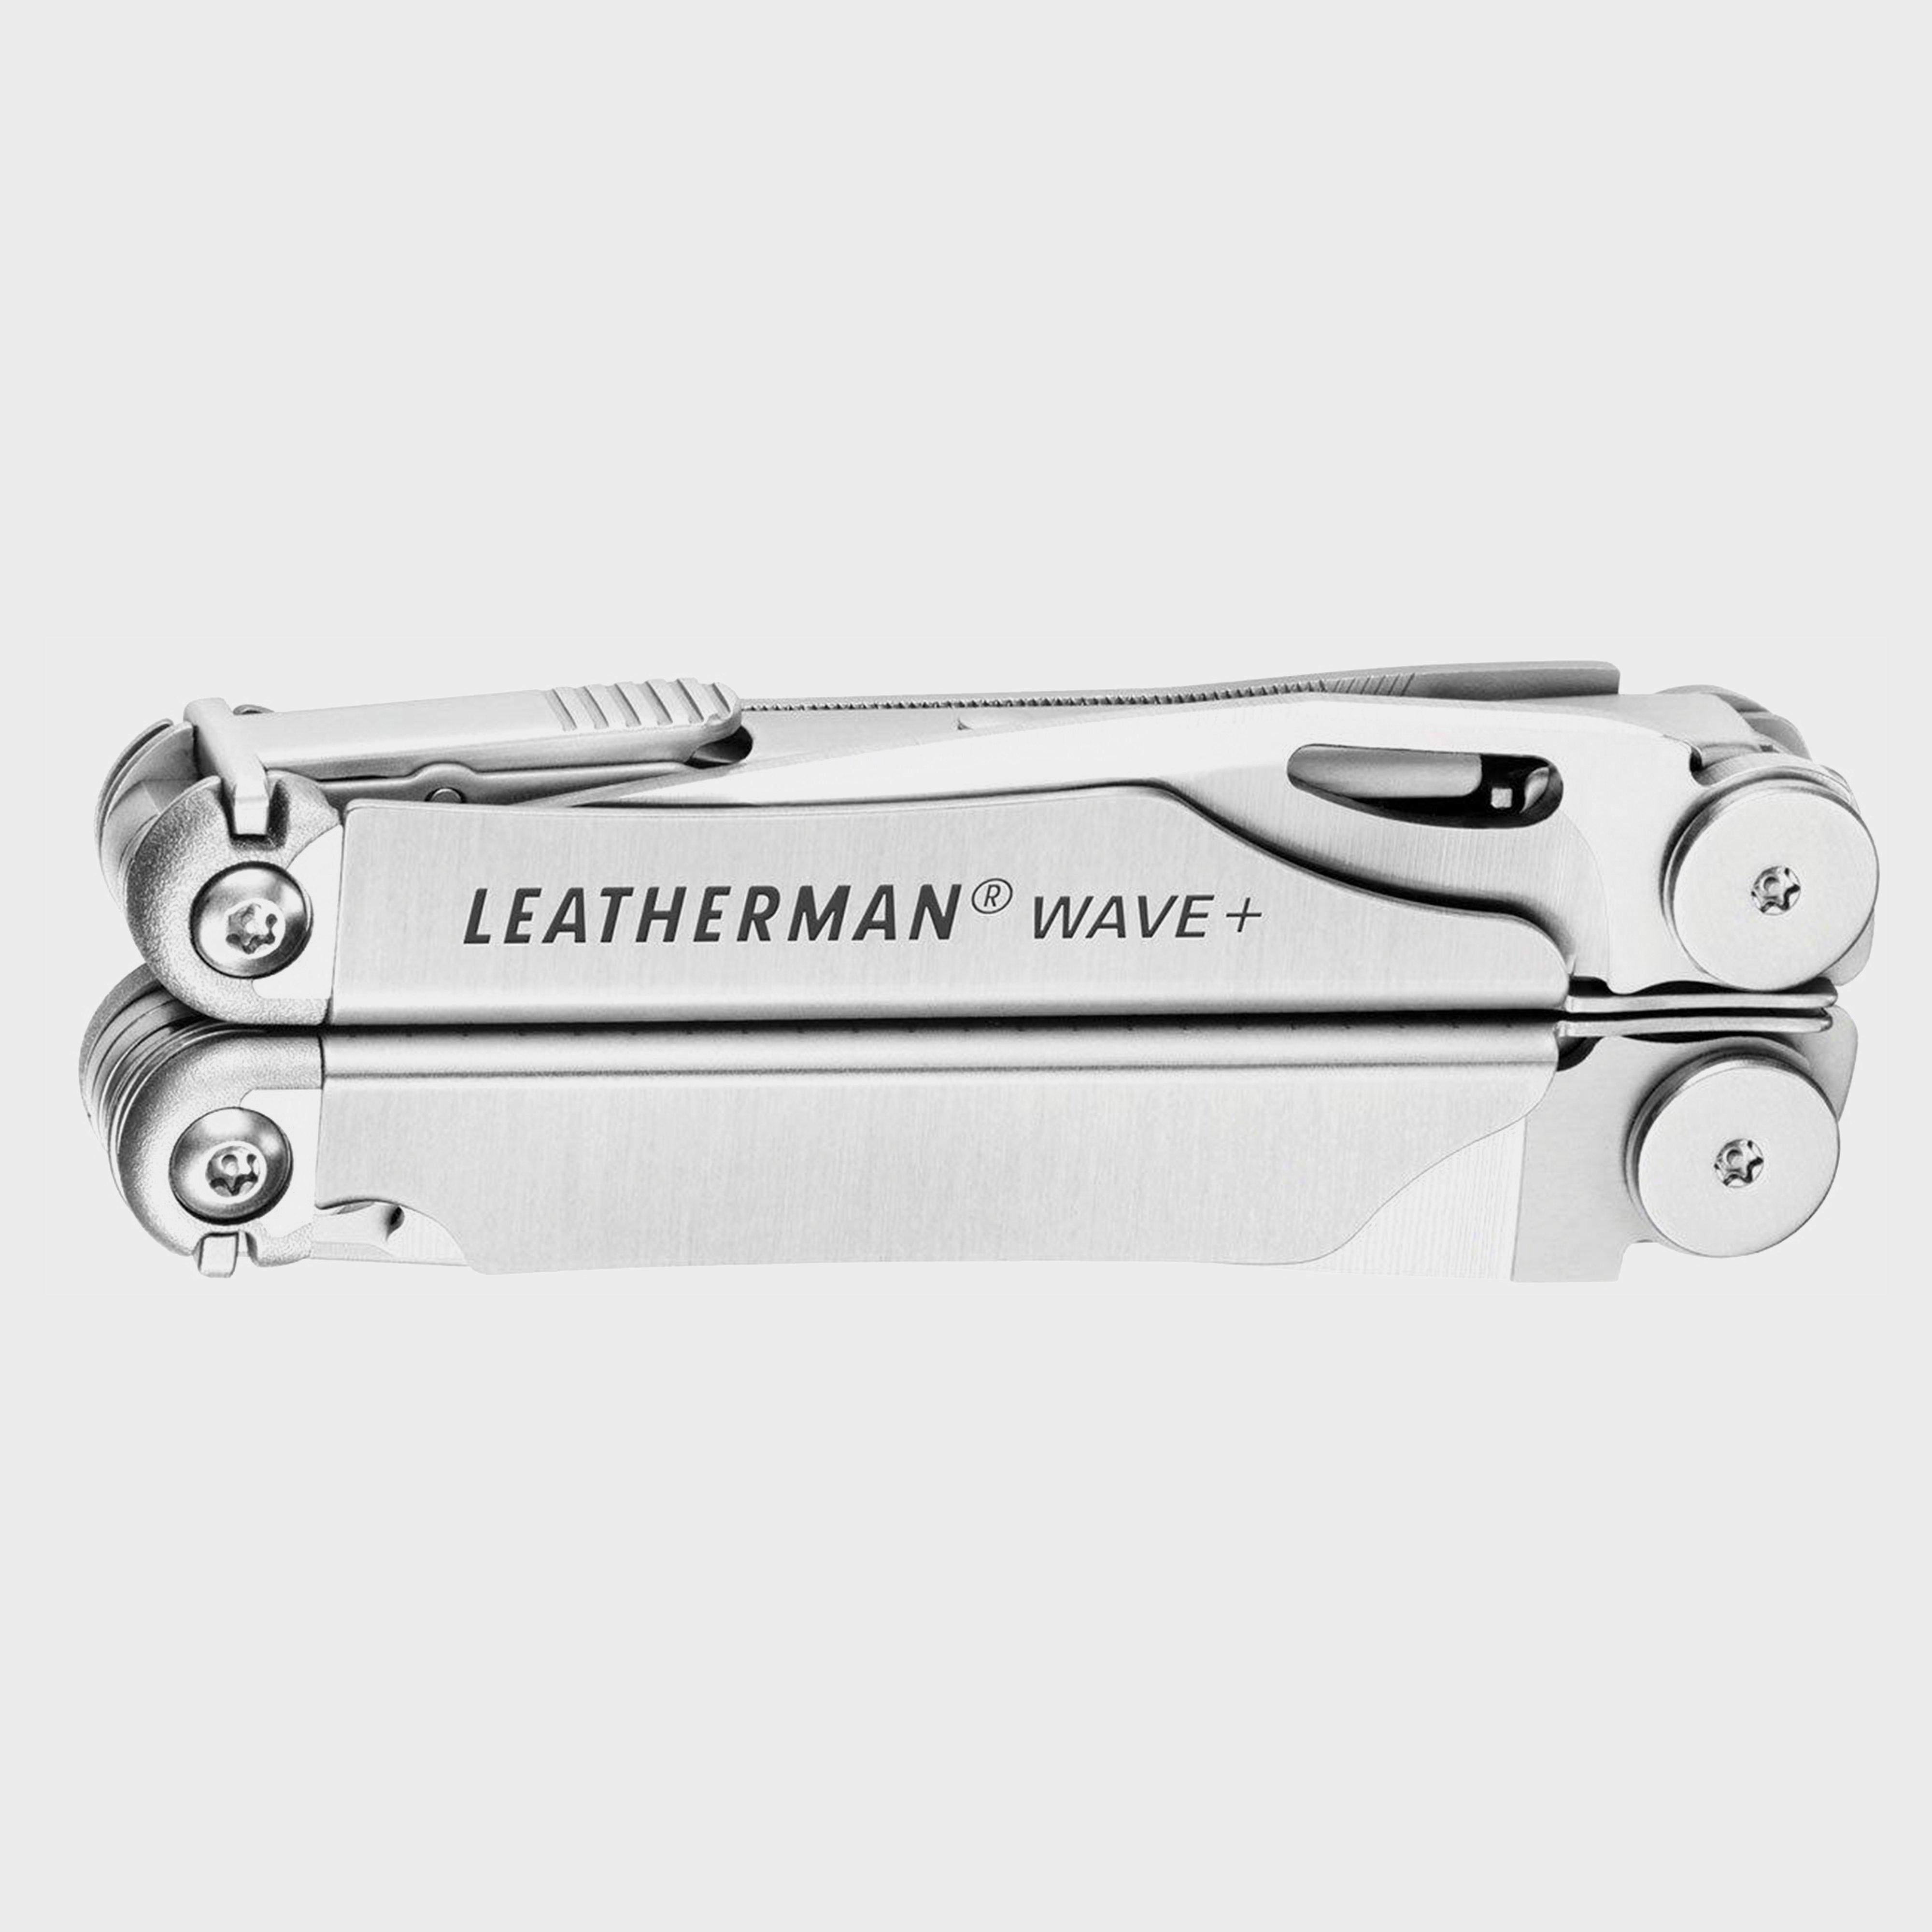 Leatherman Wave+ Multi-Tool Review